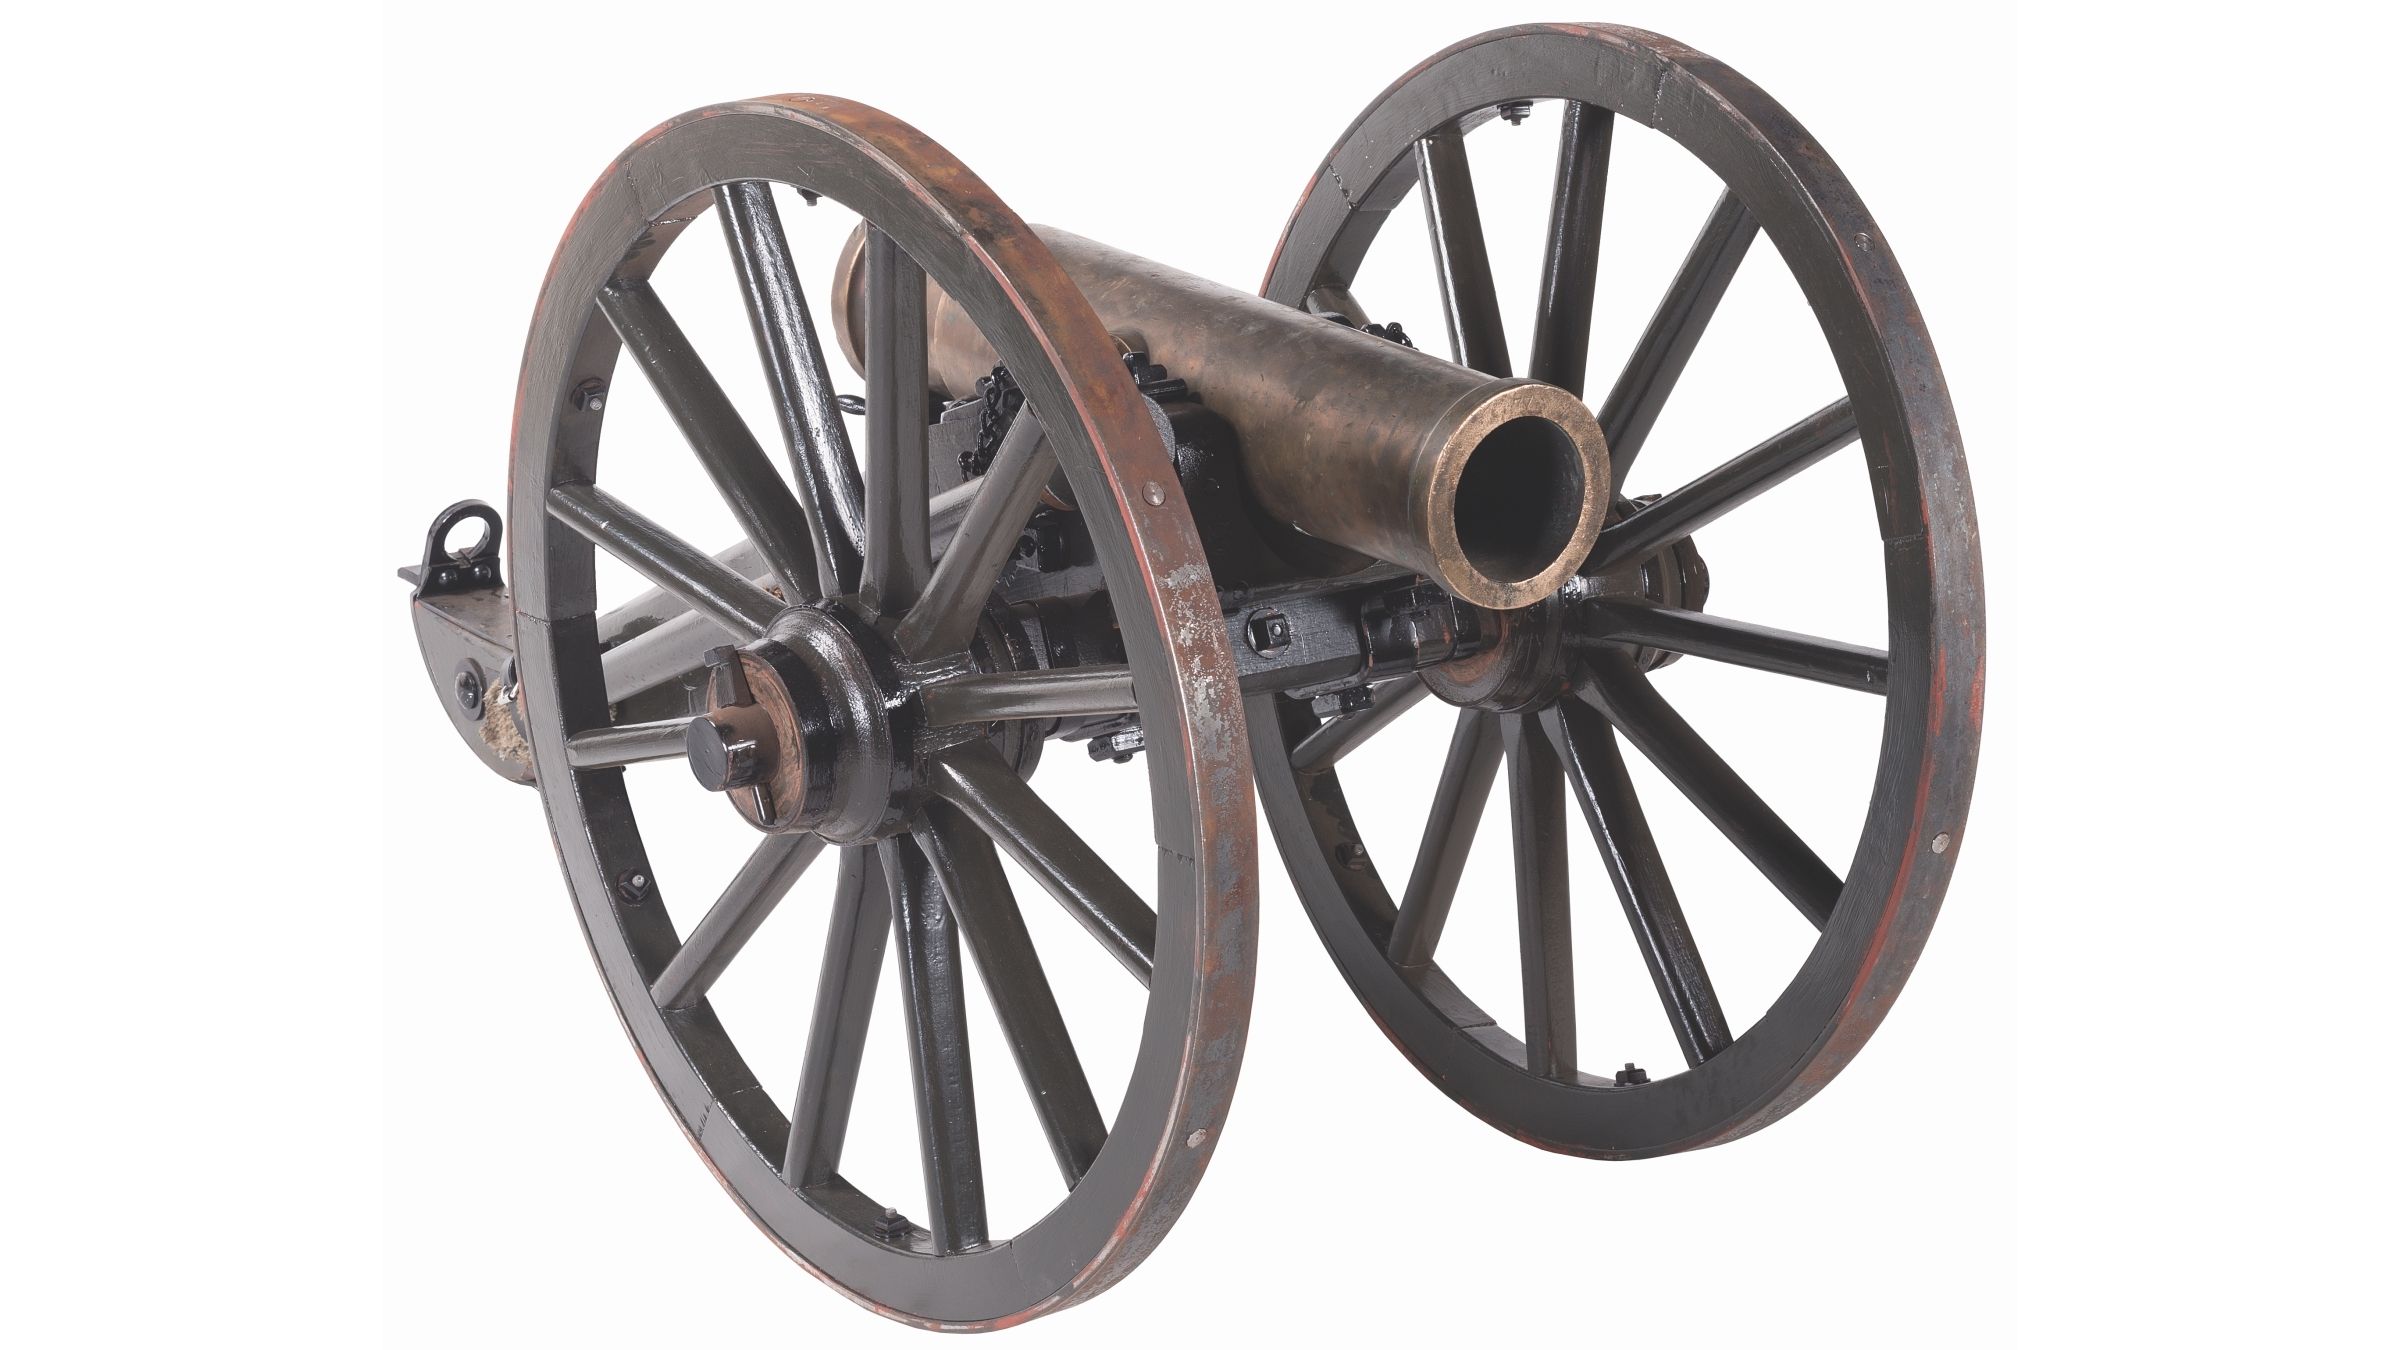 Cyrus Alger & Co. 12-Pounder Mountain Howitzer with Carriage